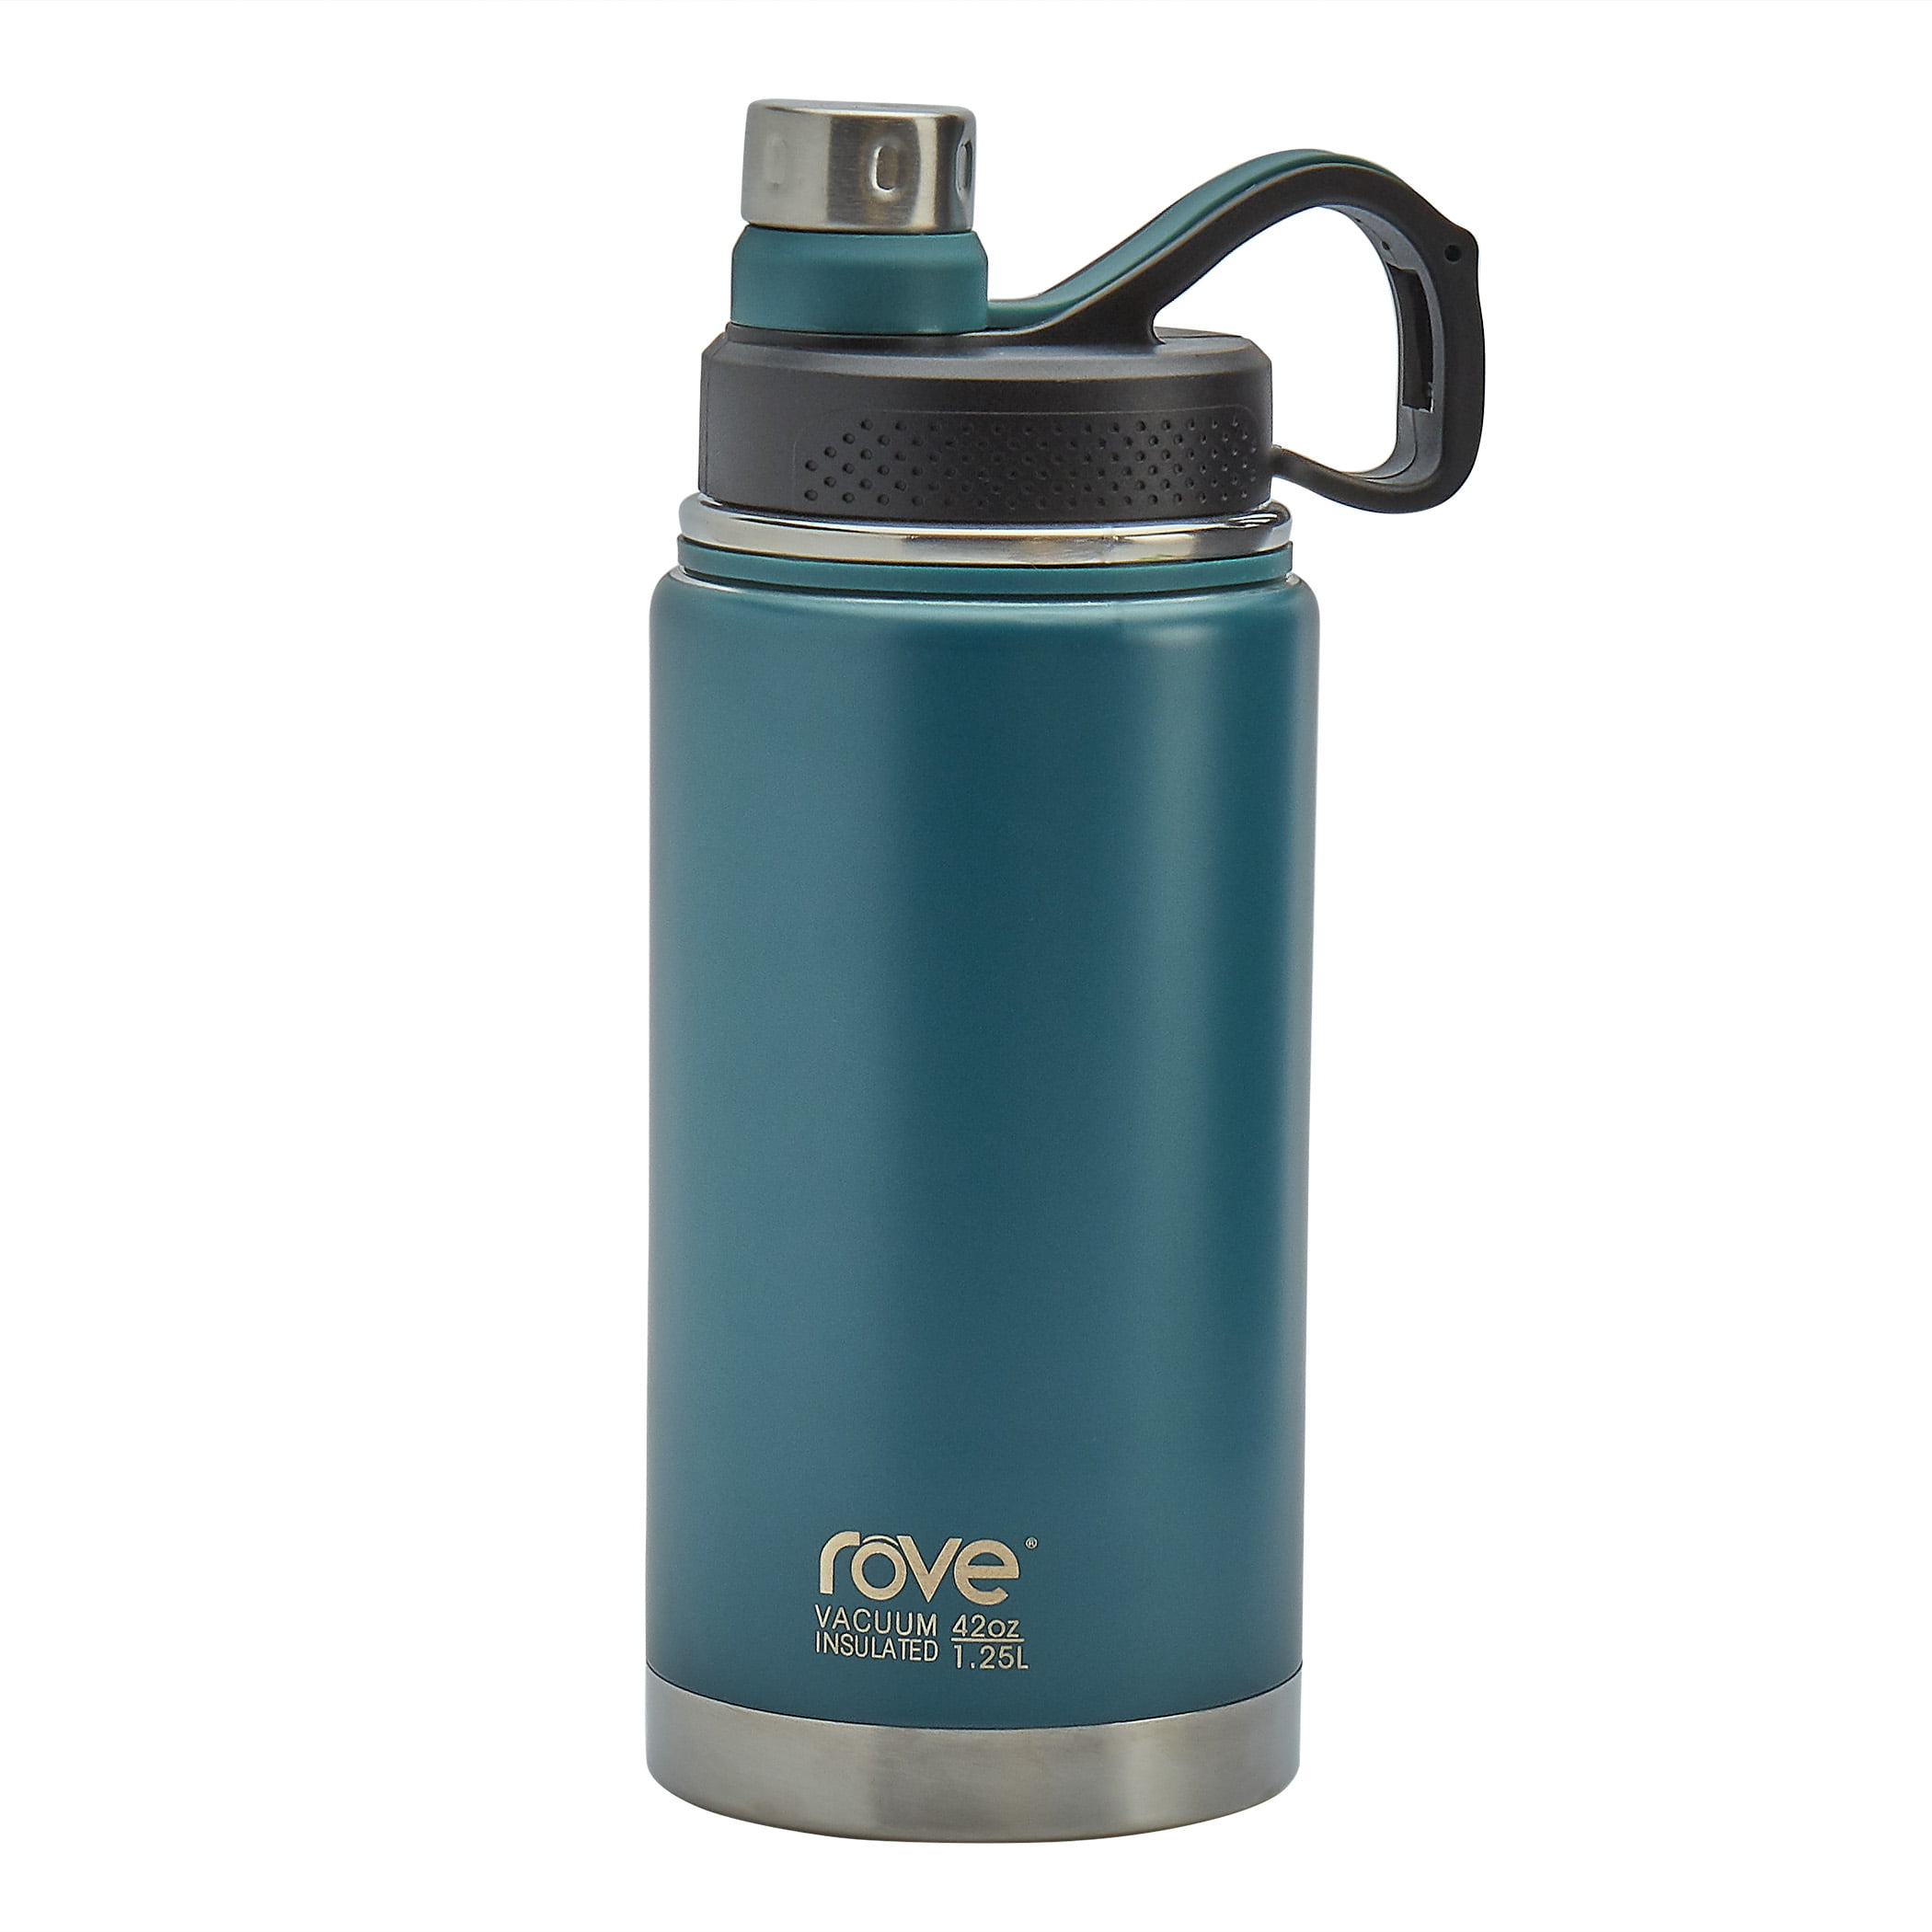 Rove 42 oz Double Wall Vacuum Insulated 